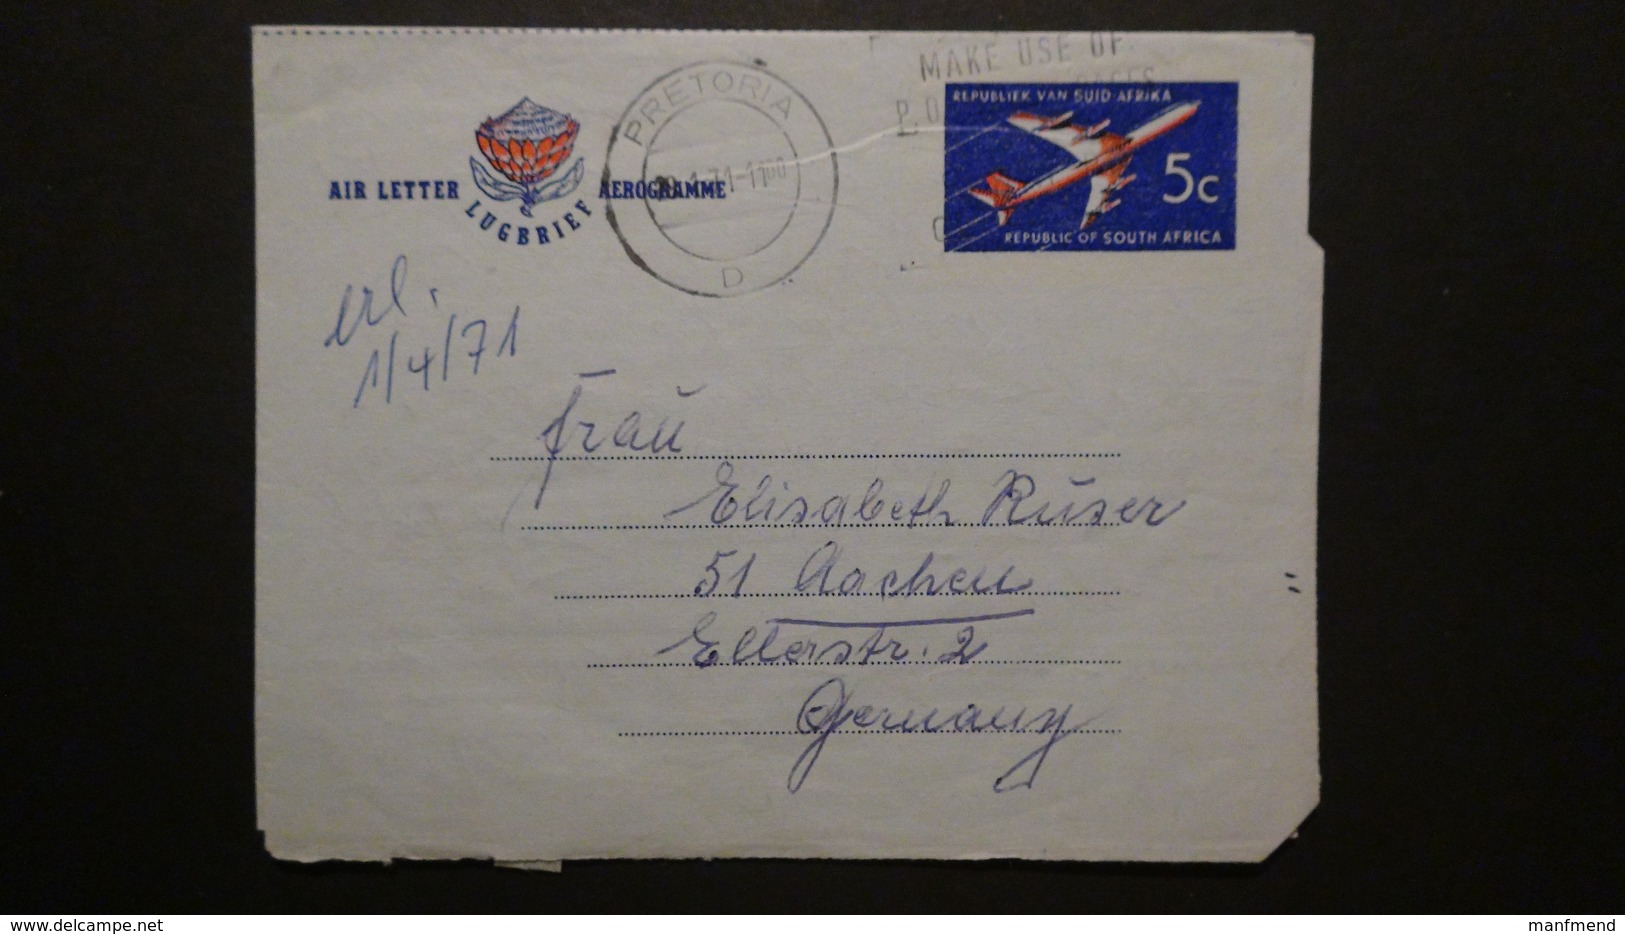 South Africa - 1971-01-29 - 5 Cents - Air Letter - Used - Postal Stationery - Look Scans - Posta Aerea